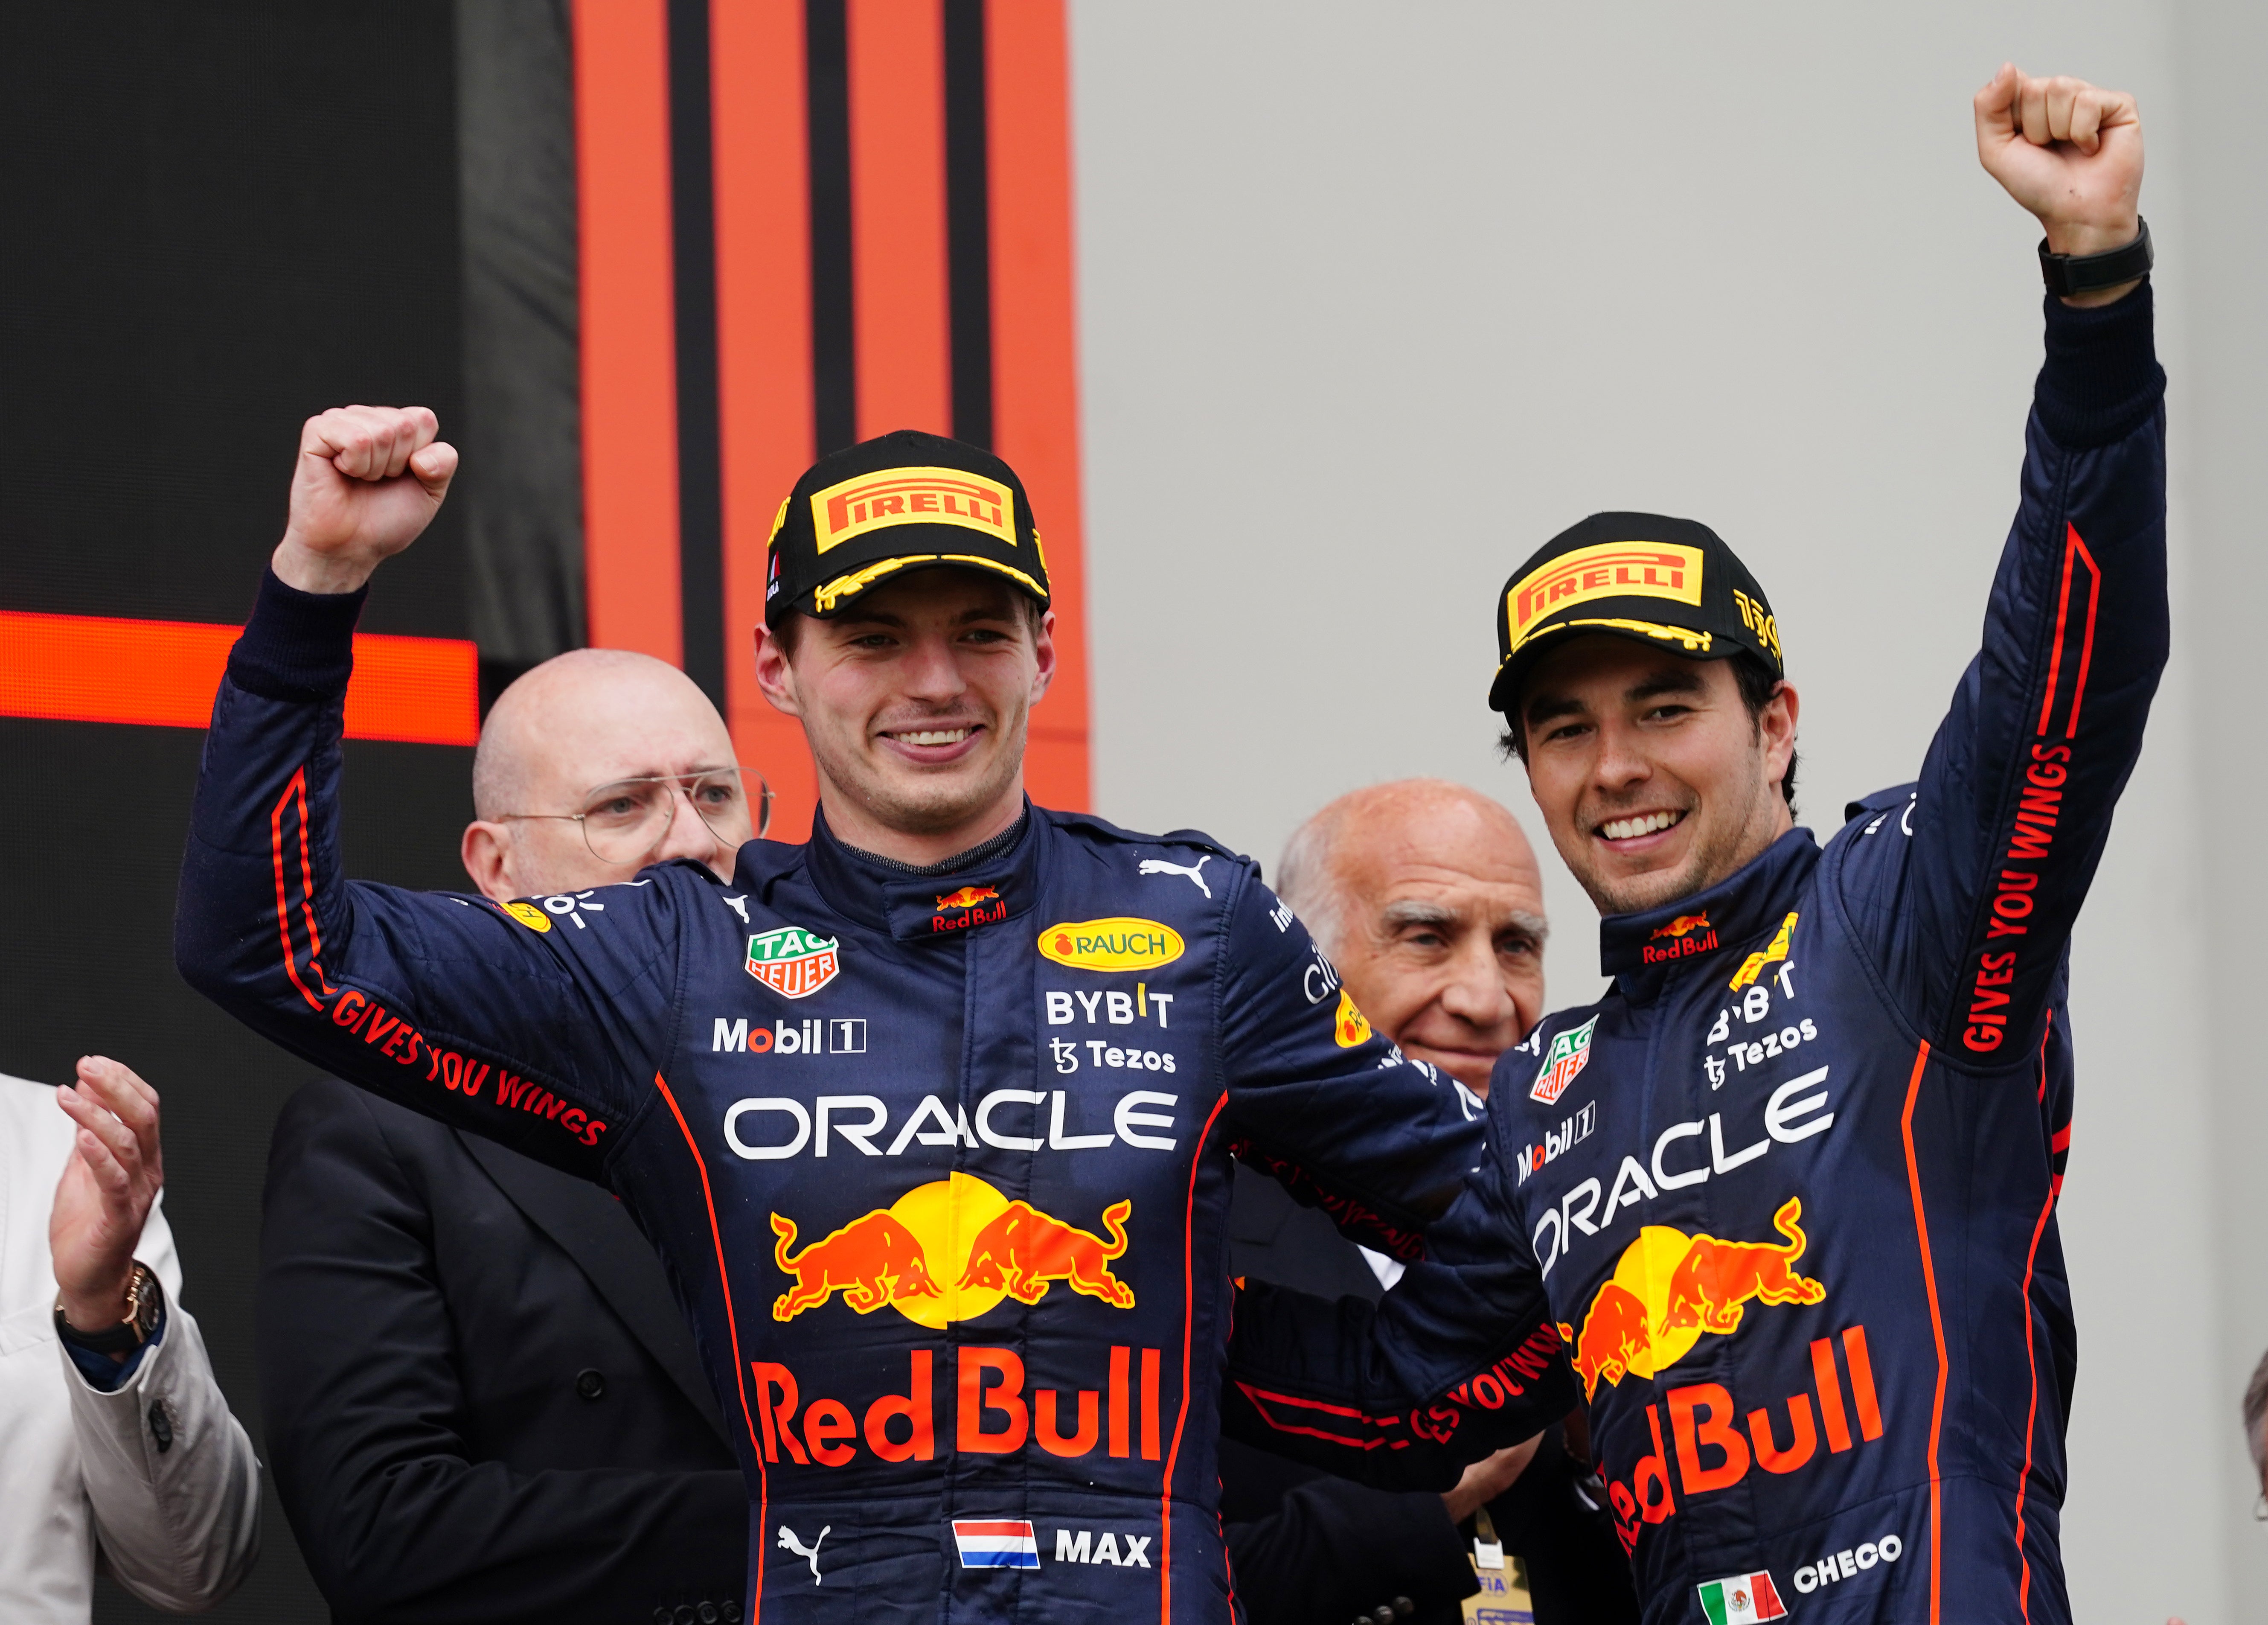 Red Bull drivers Max Verstappen and Sergio Perez celebrate their 1-2 finish in Imola (David Davies/PA)